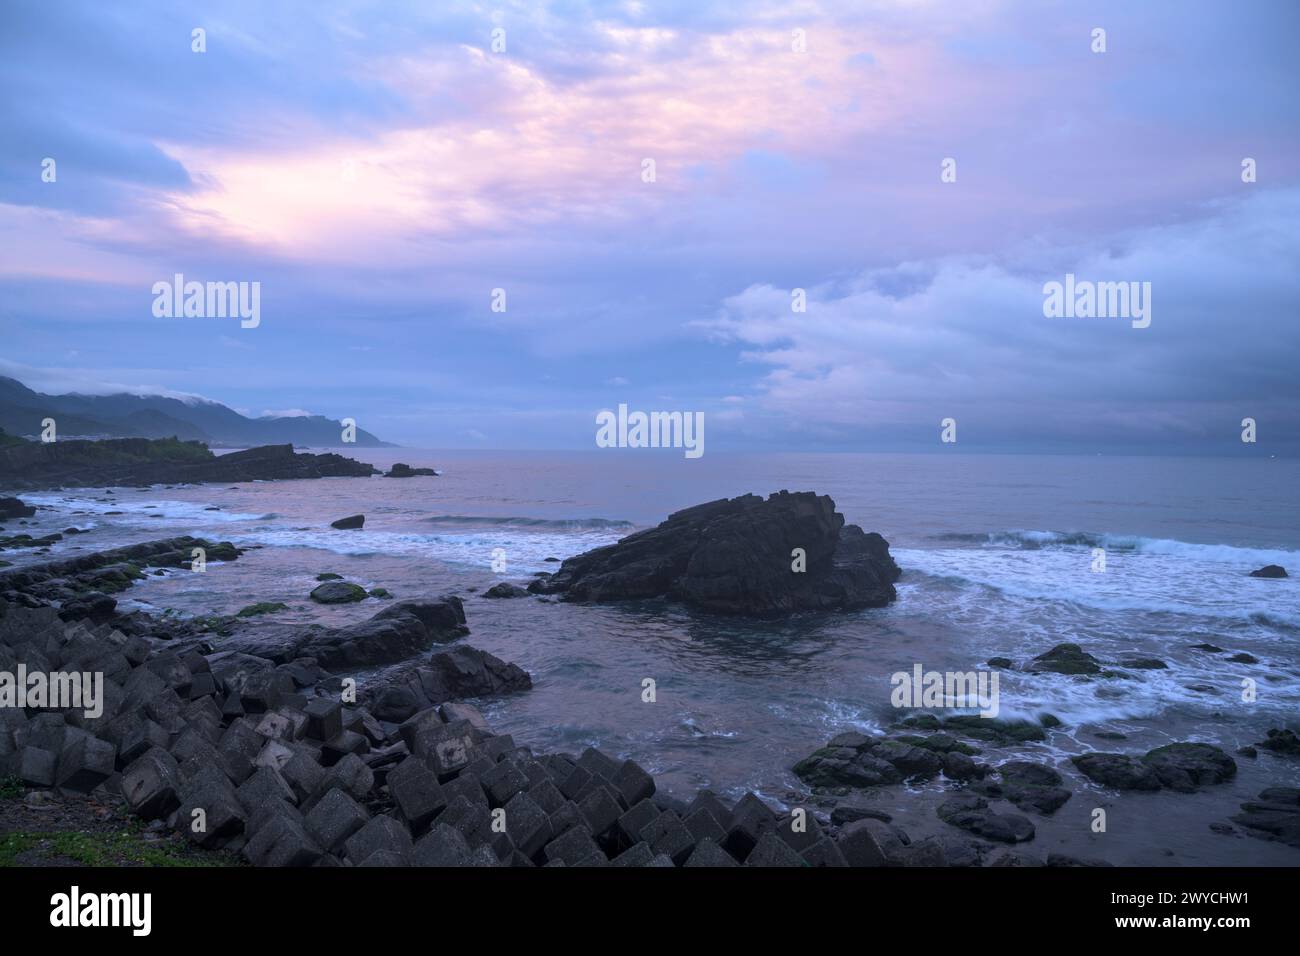 A panoramic view of a serene seascape with rocky formations at sunset Stock Photo